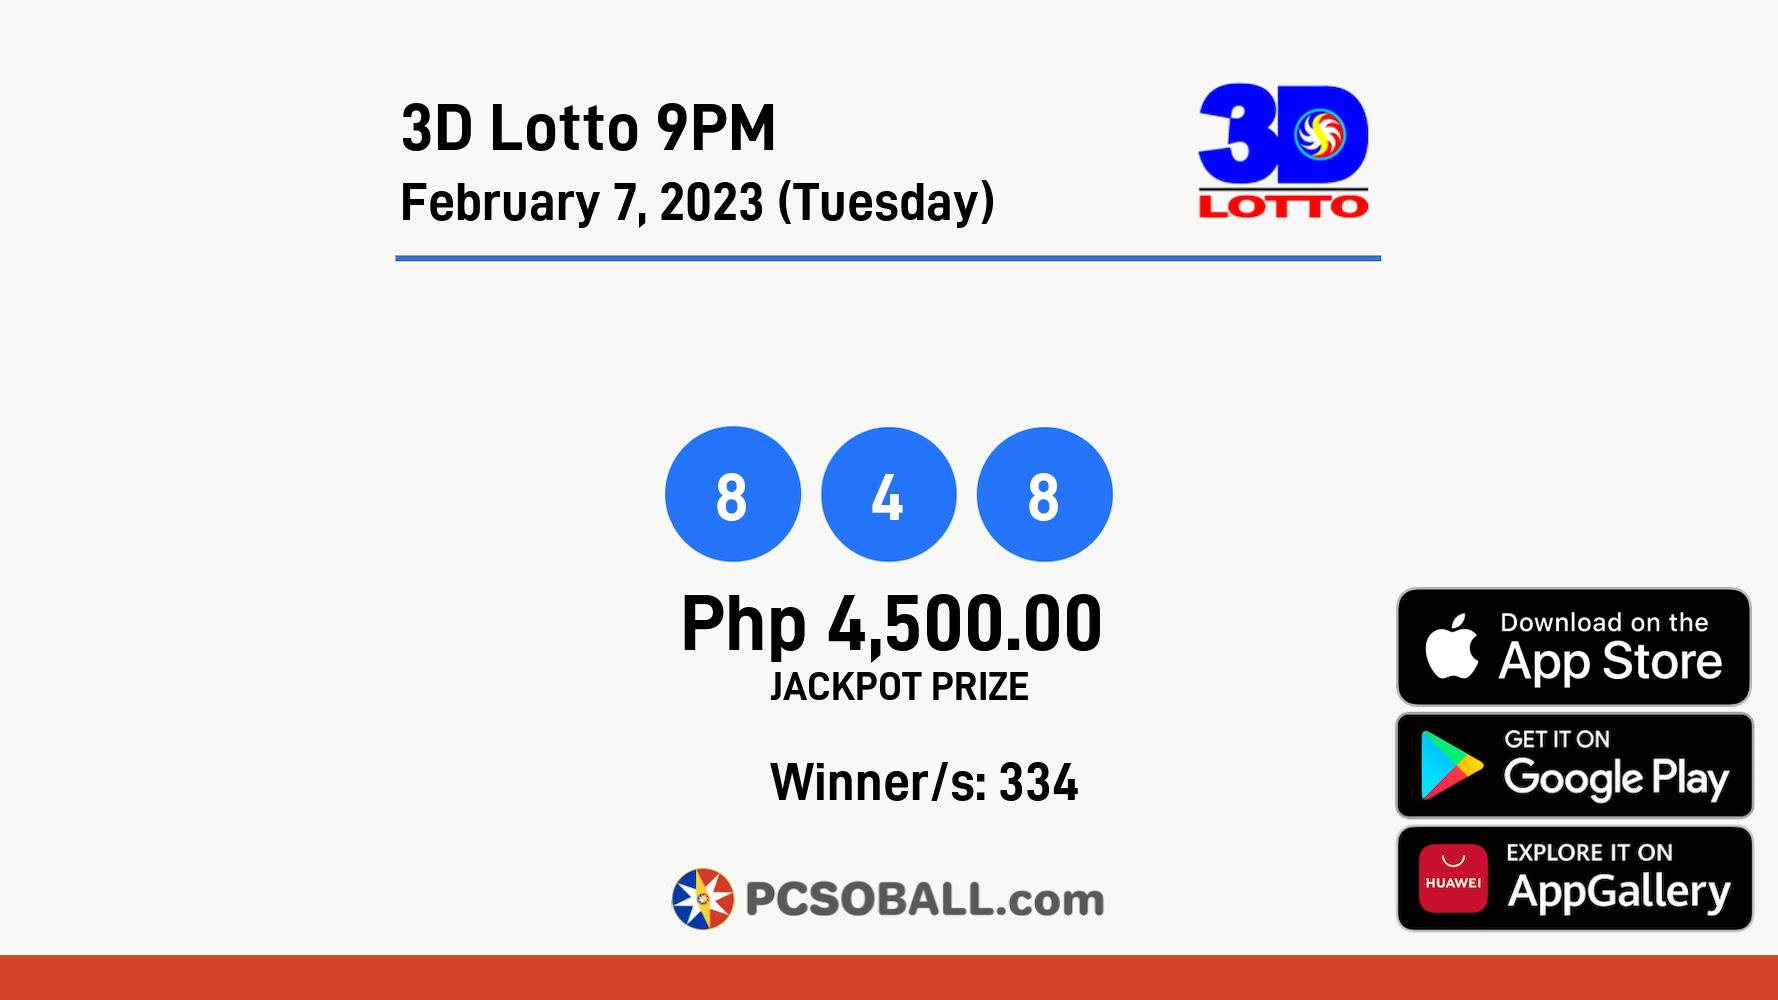 3D Lotto 9PM February 7, 2023 (Tuesday) Result